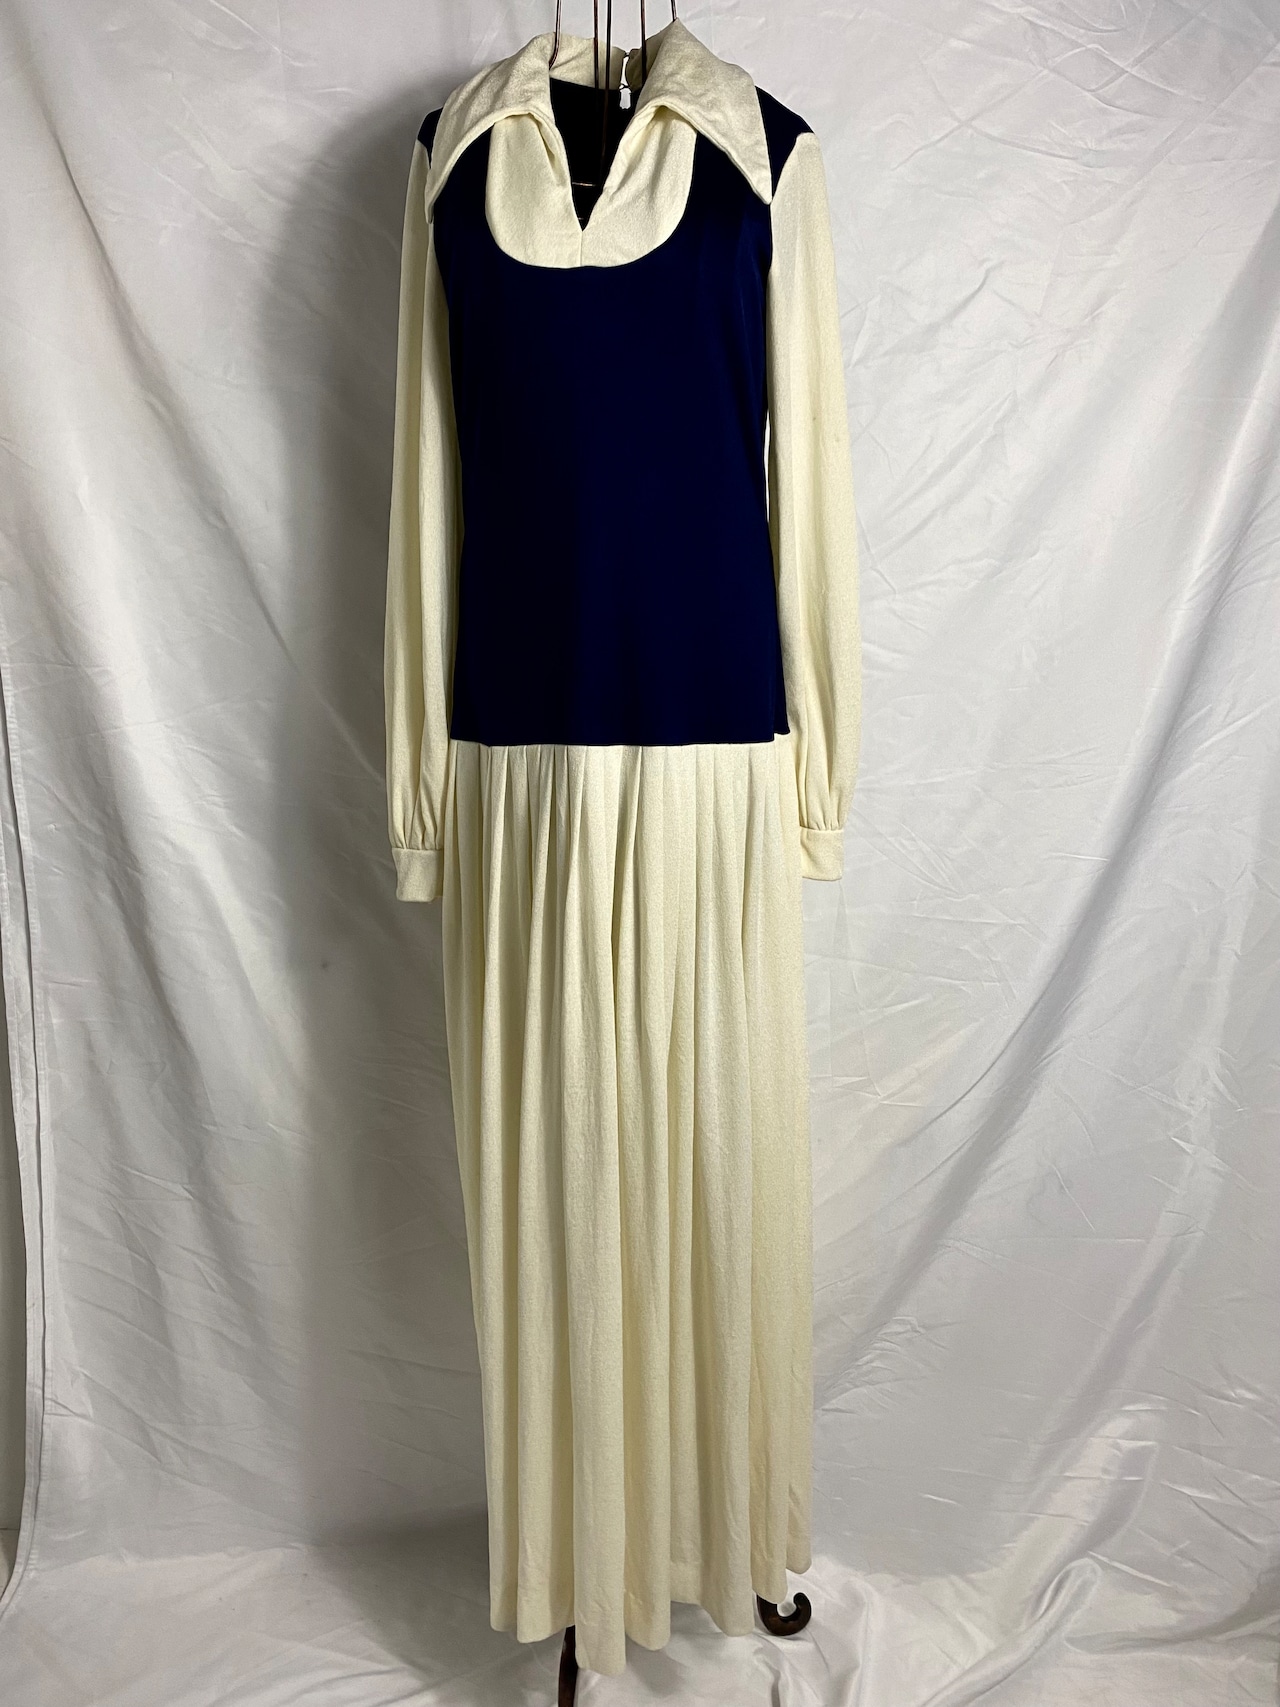 70’s Switching pleated dress Made in U.S.A